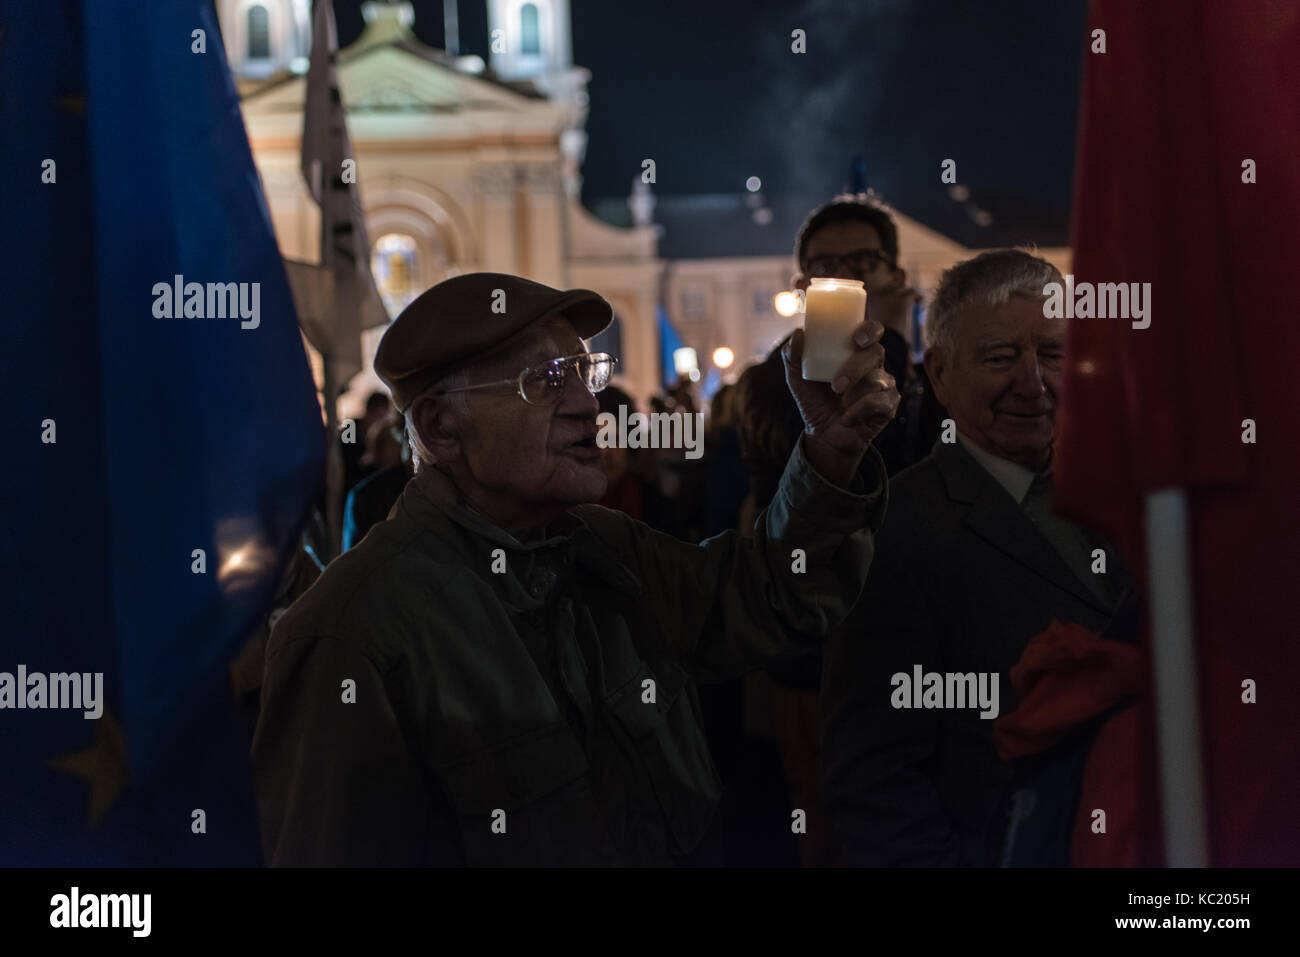 Warsaw, Poland. 01st Oct, 2017. Citizens protest against legislative changes to Poland's judicial system proposed earlier this week by president Andrzej Duda. Credit: Adam W. Byra/Alamy Live News Stock Photo